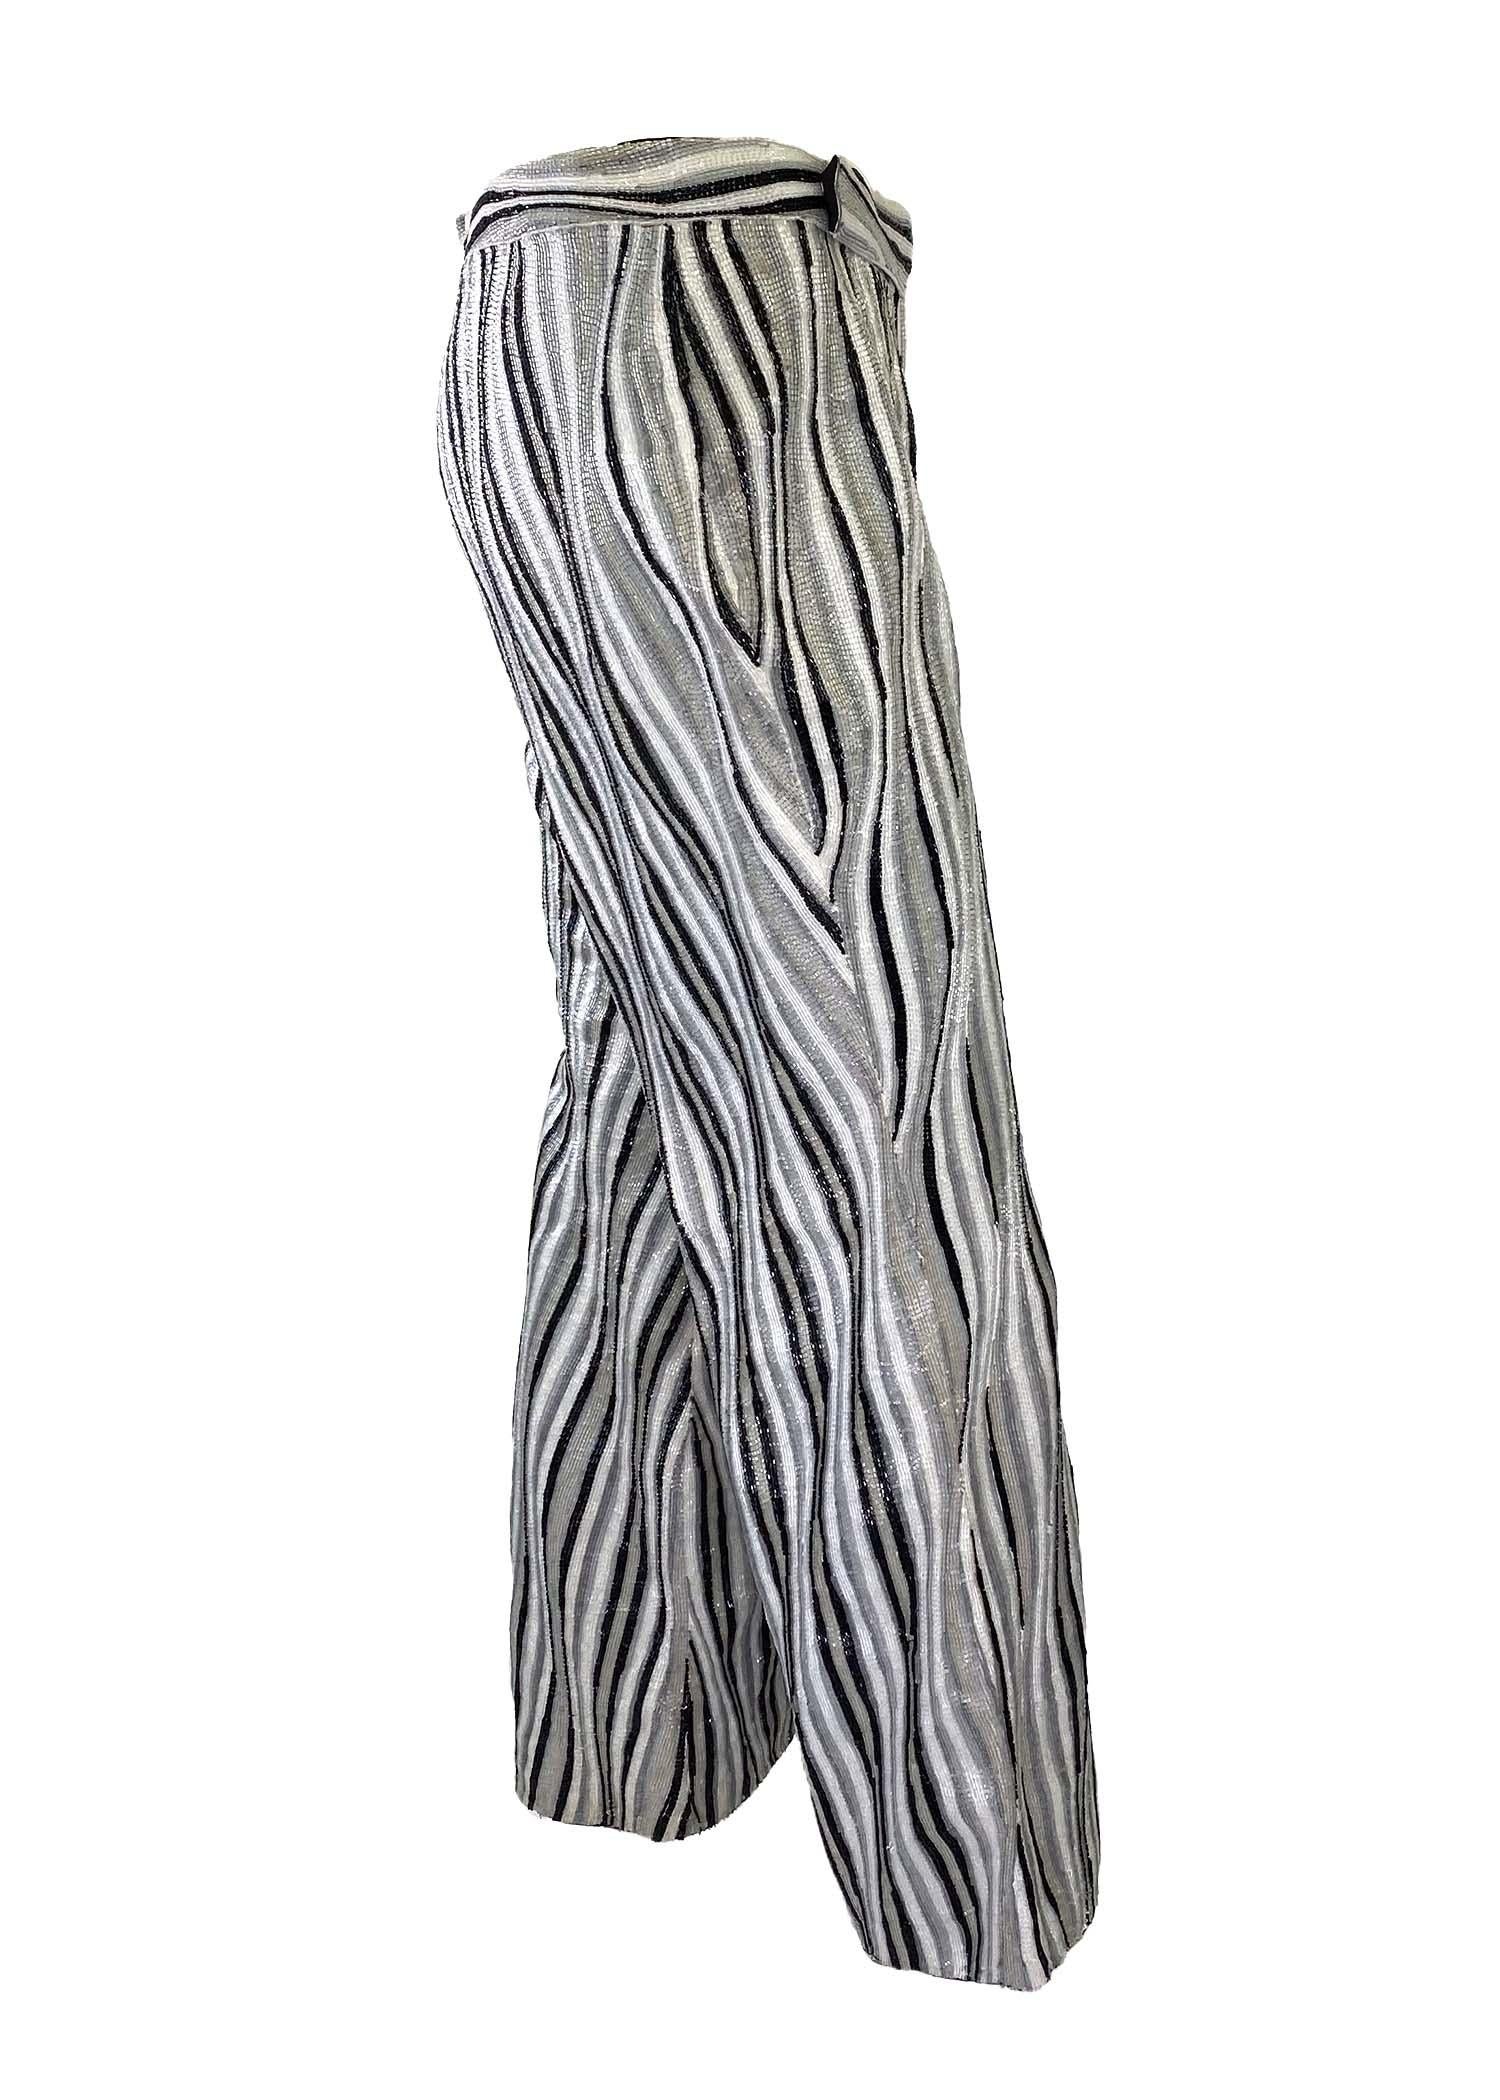 Gray S/S 2000 Gucci by Tom Ford Heavily Beaded Striped Pants Black White Grey Runway For Sale